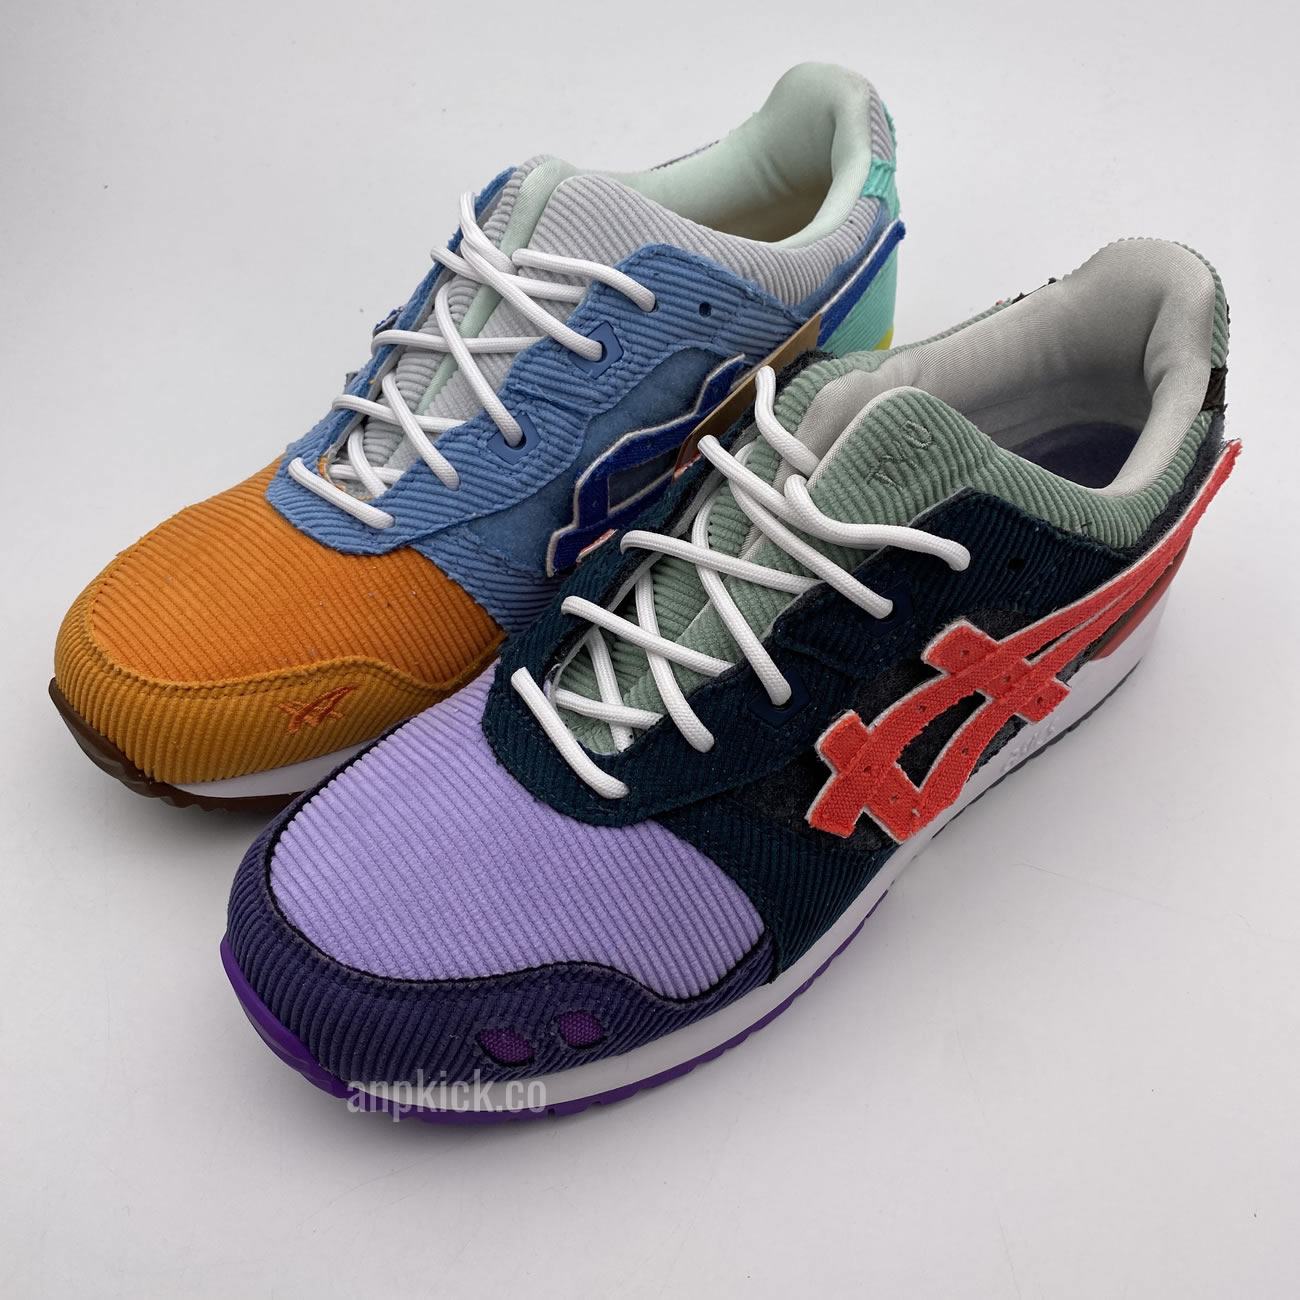 Sean Wotherspoon Atmos Asics Gel Lyte Og Shoes Multi 1203a019 000 (6) - newkick.org